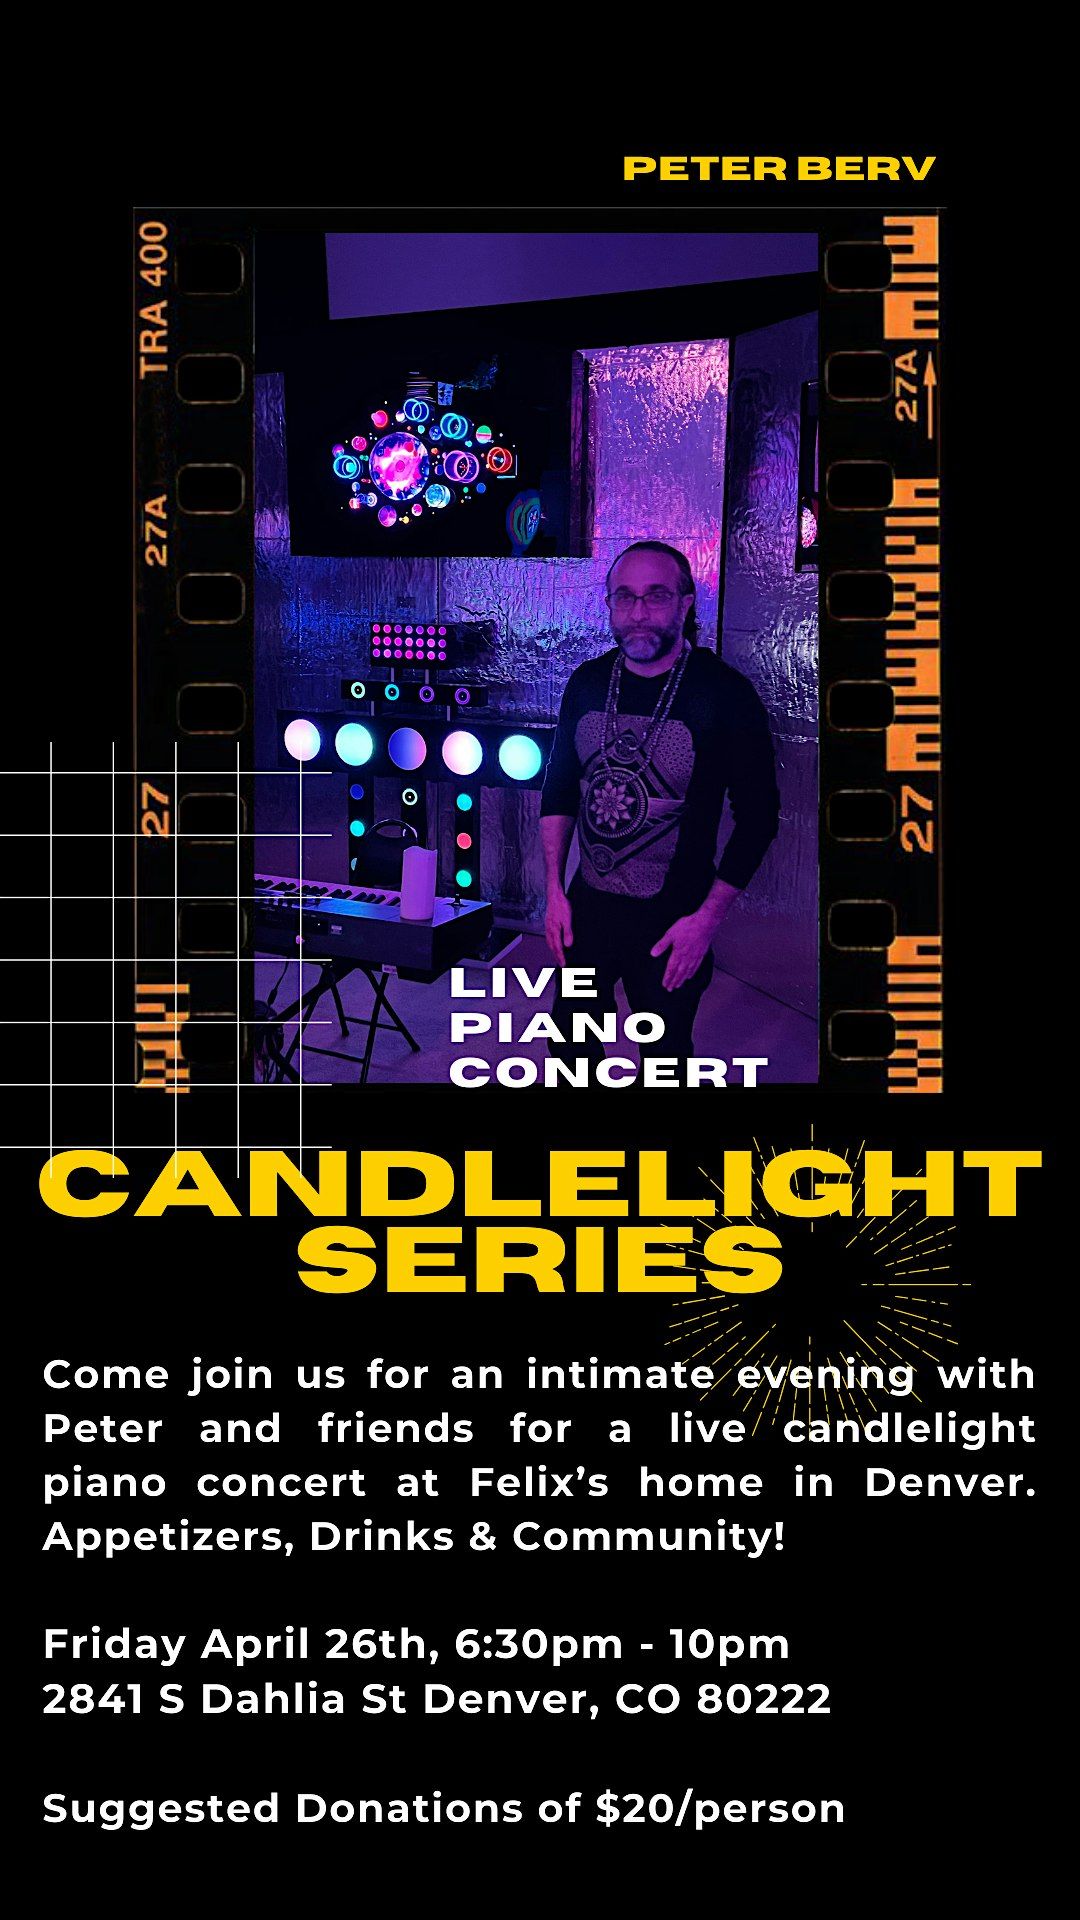 Live Piano Concert Candlelight Series